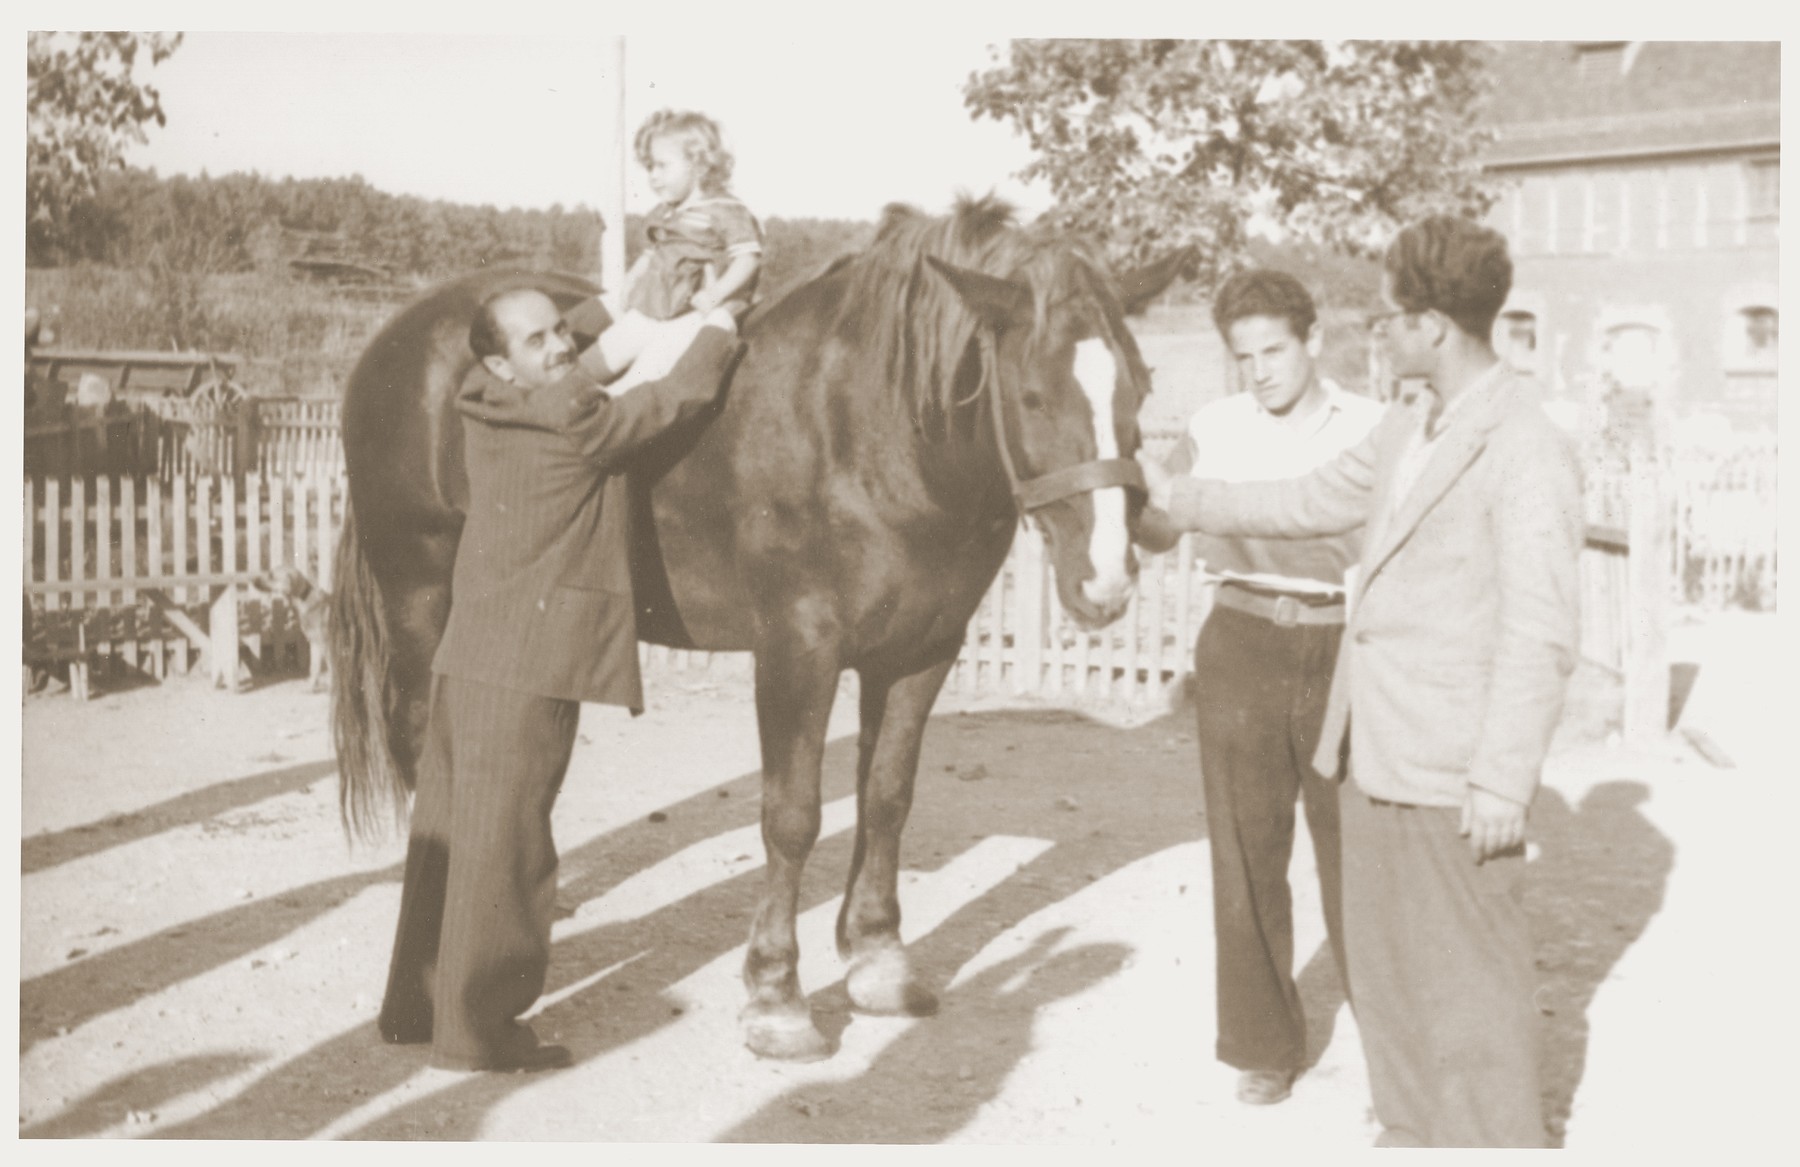 Noach Miedzinski lifts his daughter, Nili, onto one of the horses at the Kibbutz Nili hachshara (Zionist collective) in Pleikershof, Germany.